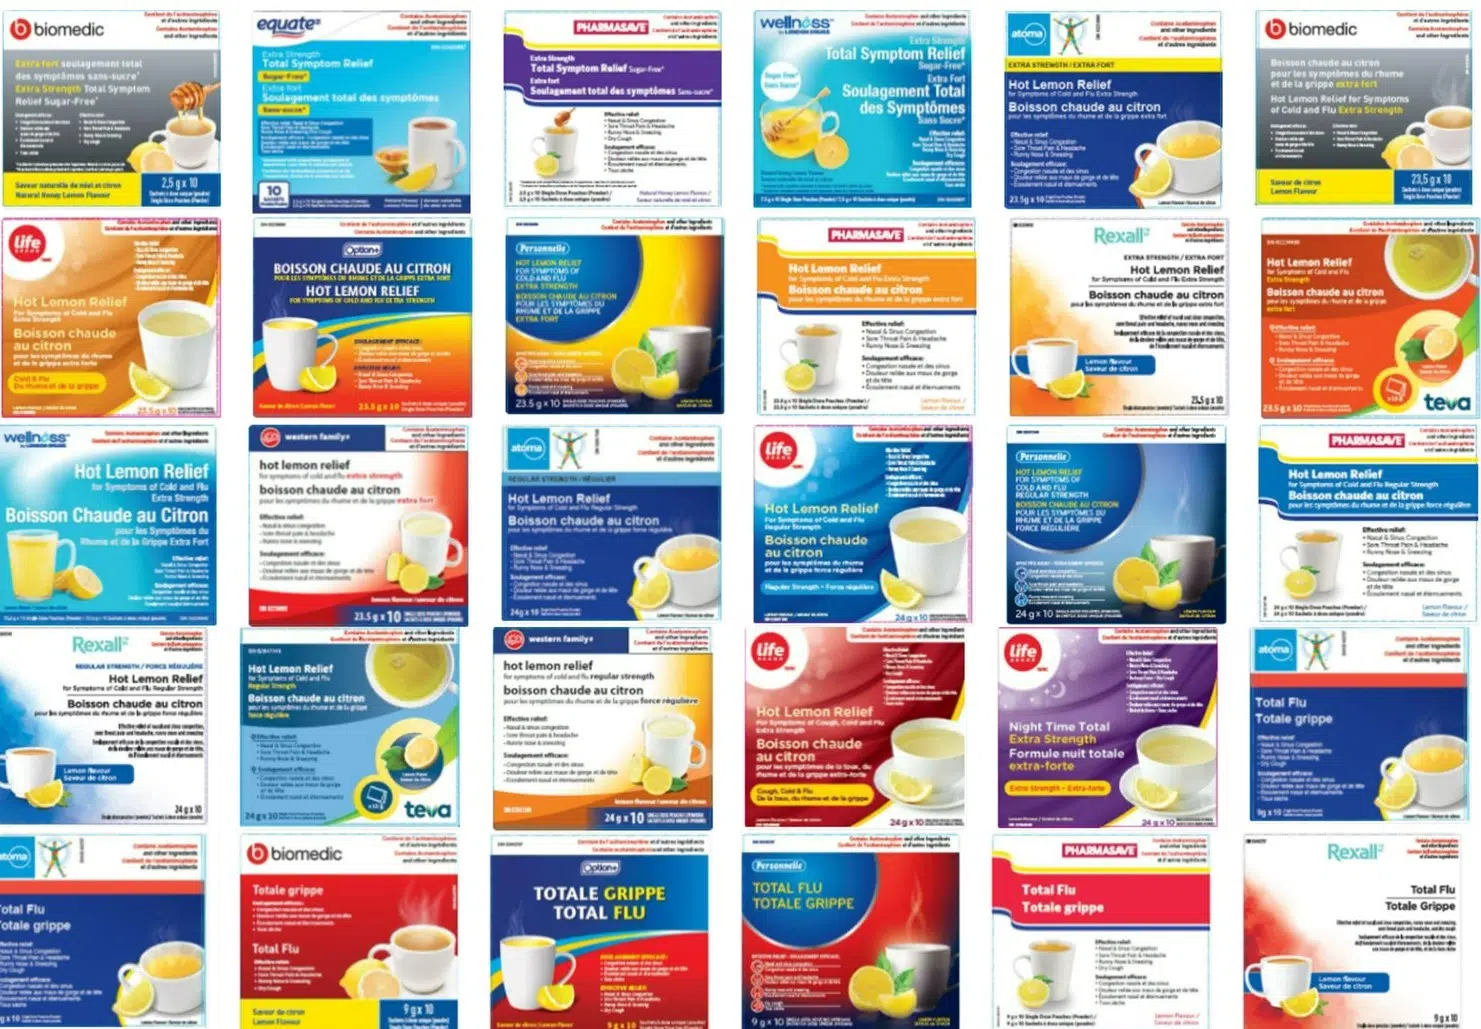 Cold and flu powdered medications recalled